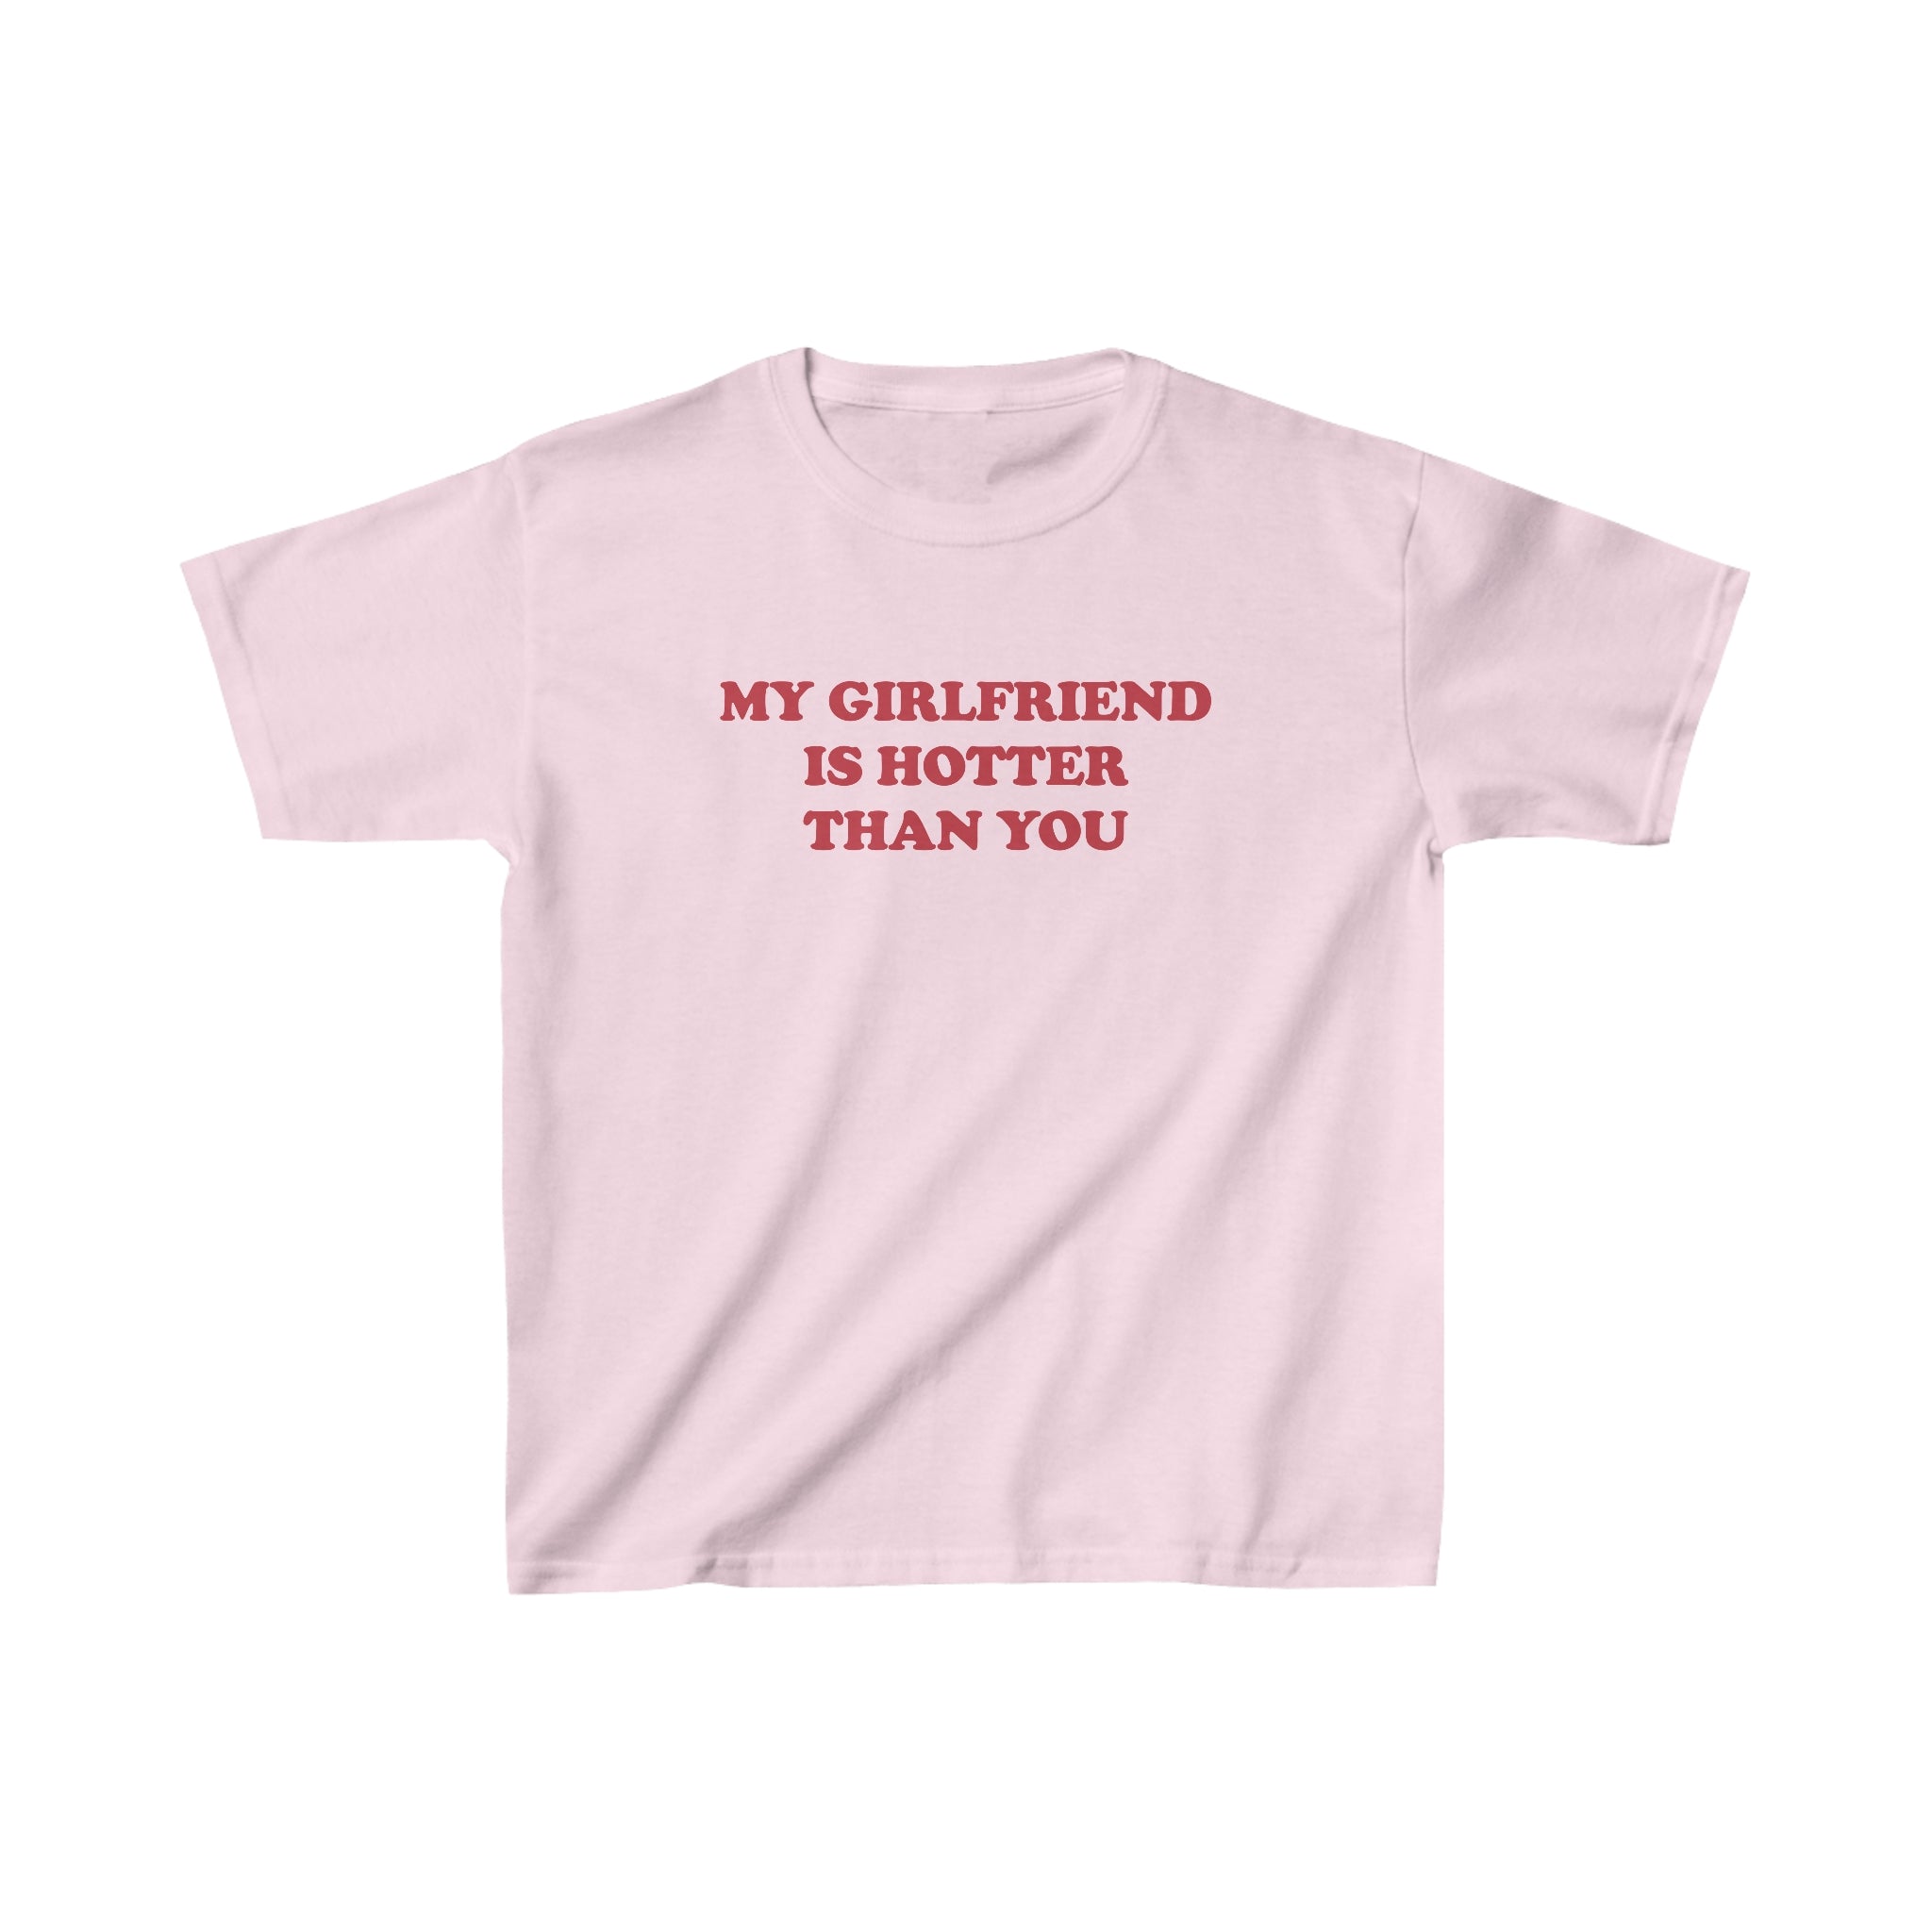 'My Girlfriend is Hotter Than You' baby tee - In Print We Trust